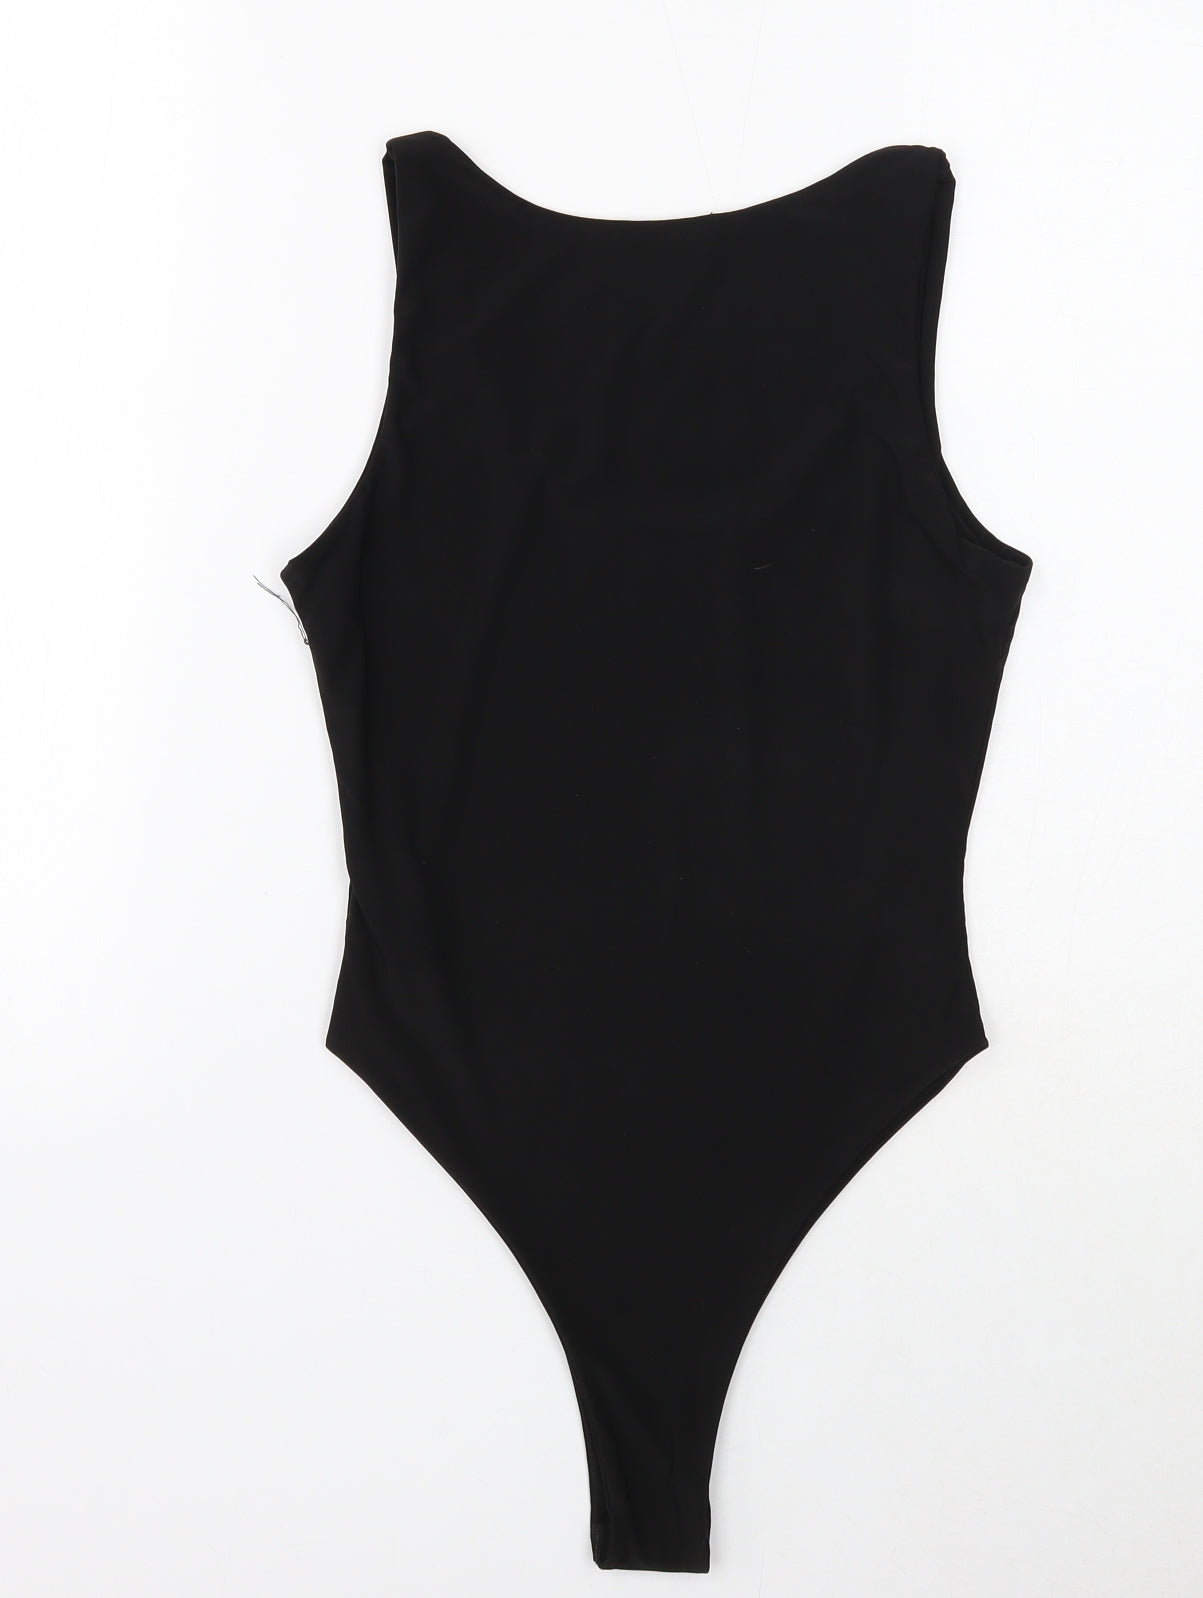 Boohoo Womens Black Polyester Bodysuit One-Piece Size 10 Snap